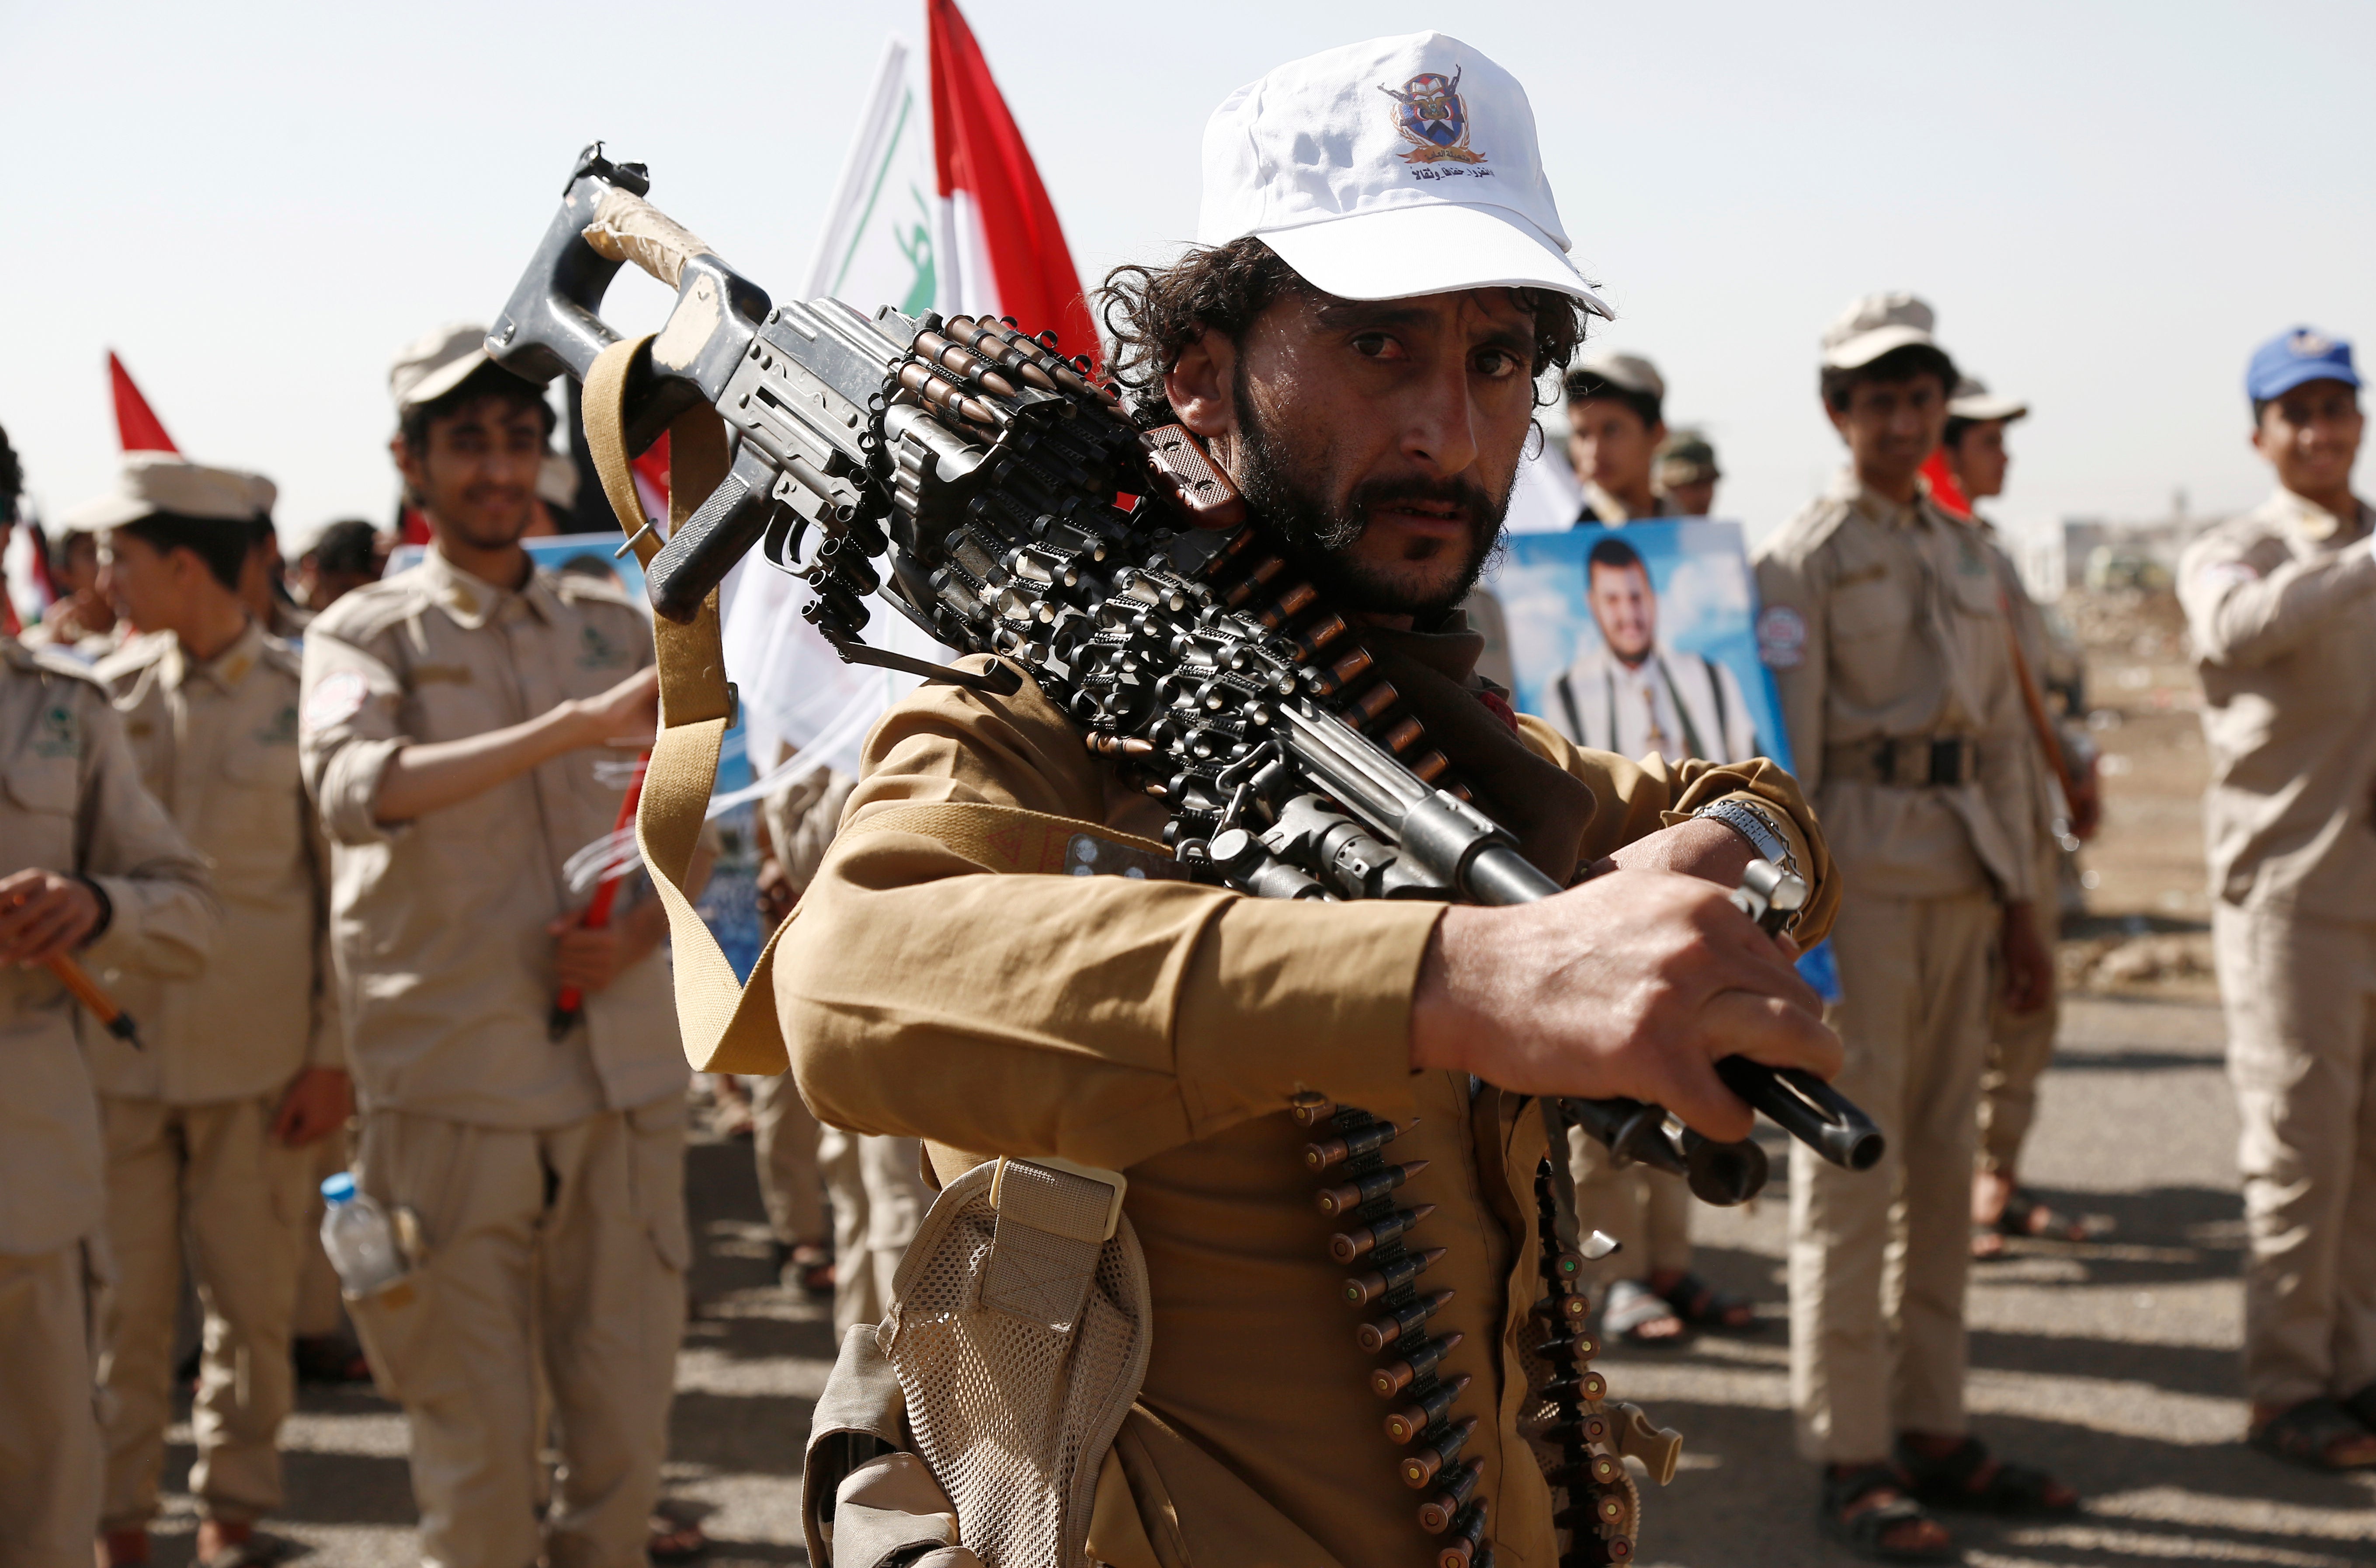 A Houthi fighter carries a machine gun in front of scout team members carrying Yemeni and Palestinian flags